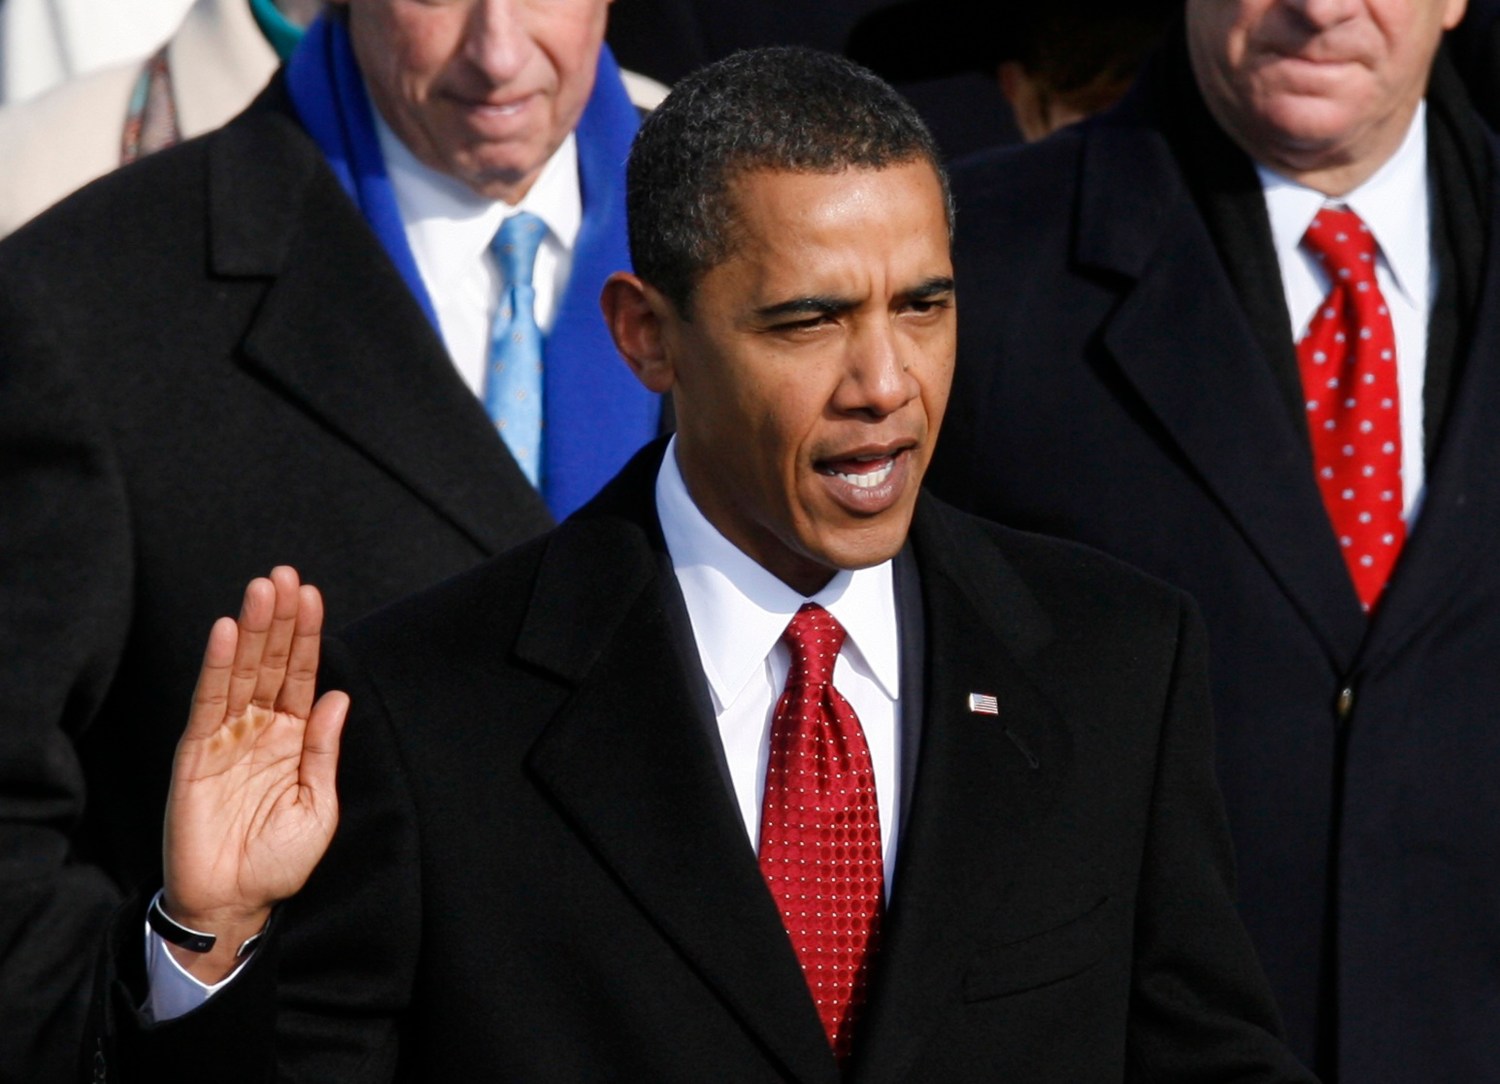 Barack Obama is sworn in as 44th President of United States